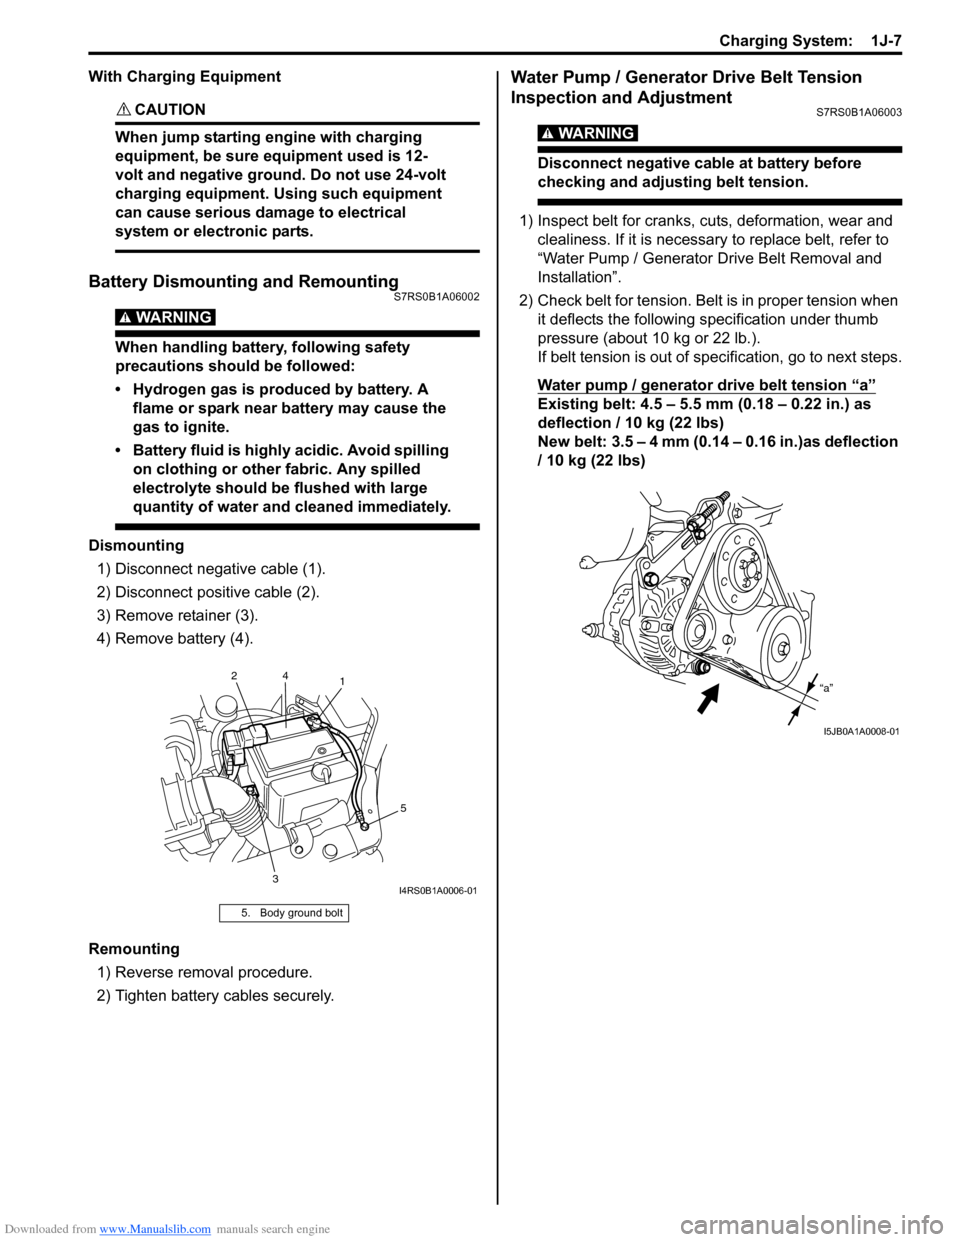 SUZUKI SWIFT 2008 2.G Service Workshop Manual Downloaded from www.Manualslib.com manuals search engine Charging System:  1J-7
With Charging Equipment
CAUTION! 
When jump starting engine with charging 
equipment, be sure equipment used is 12-
volt